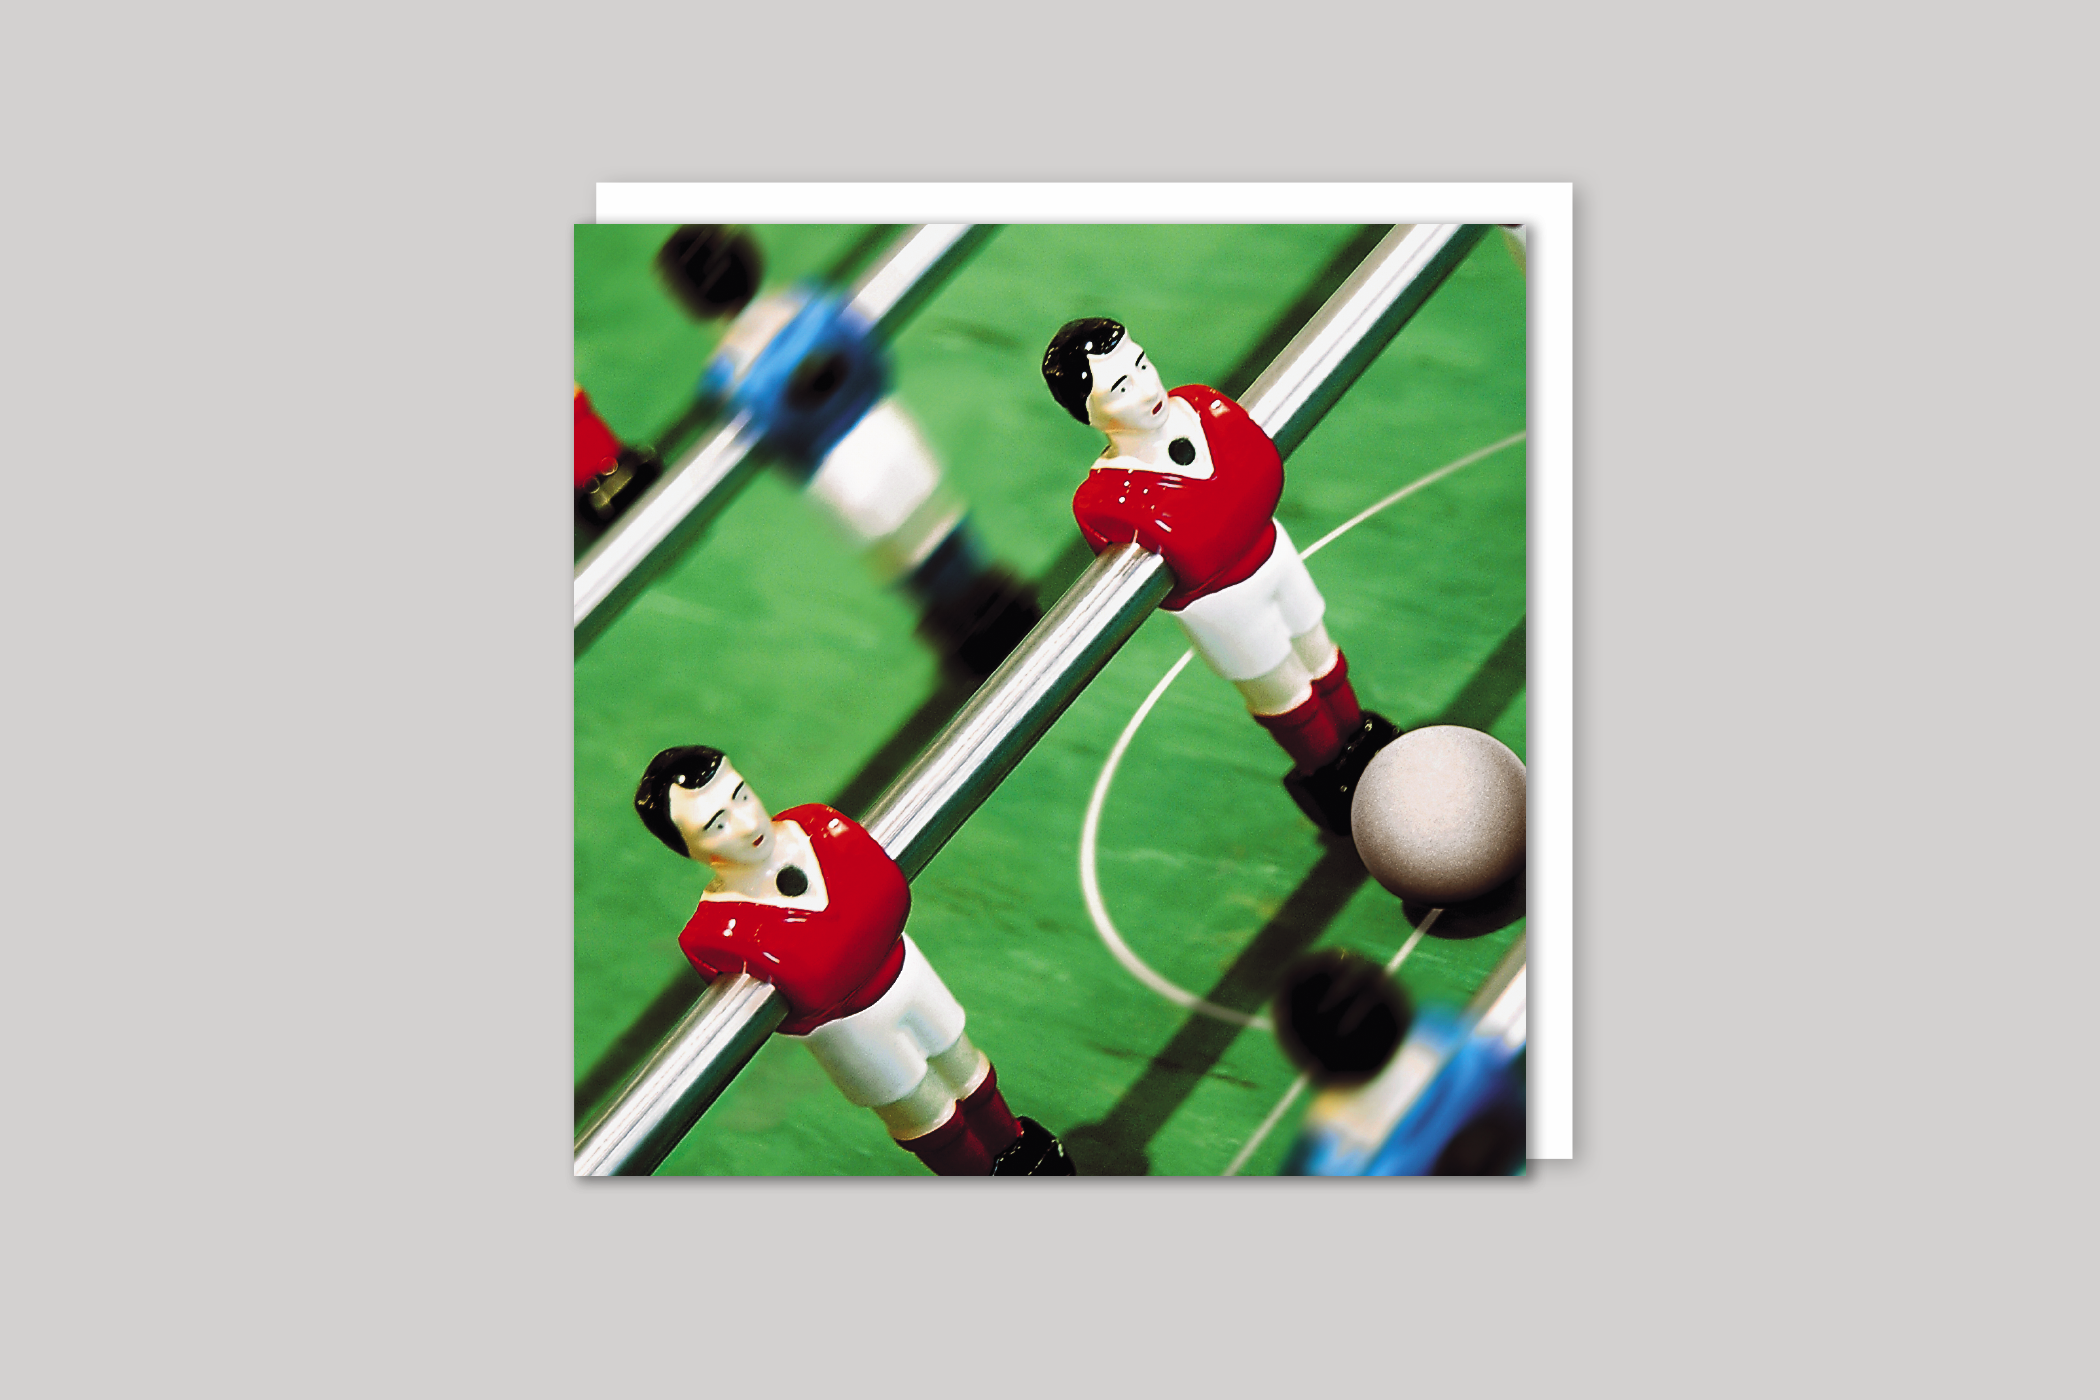 Match of the Day from Exposure range of photographic cards by Icon, back page.